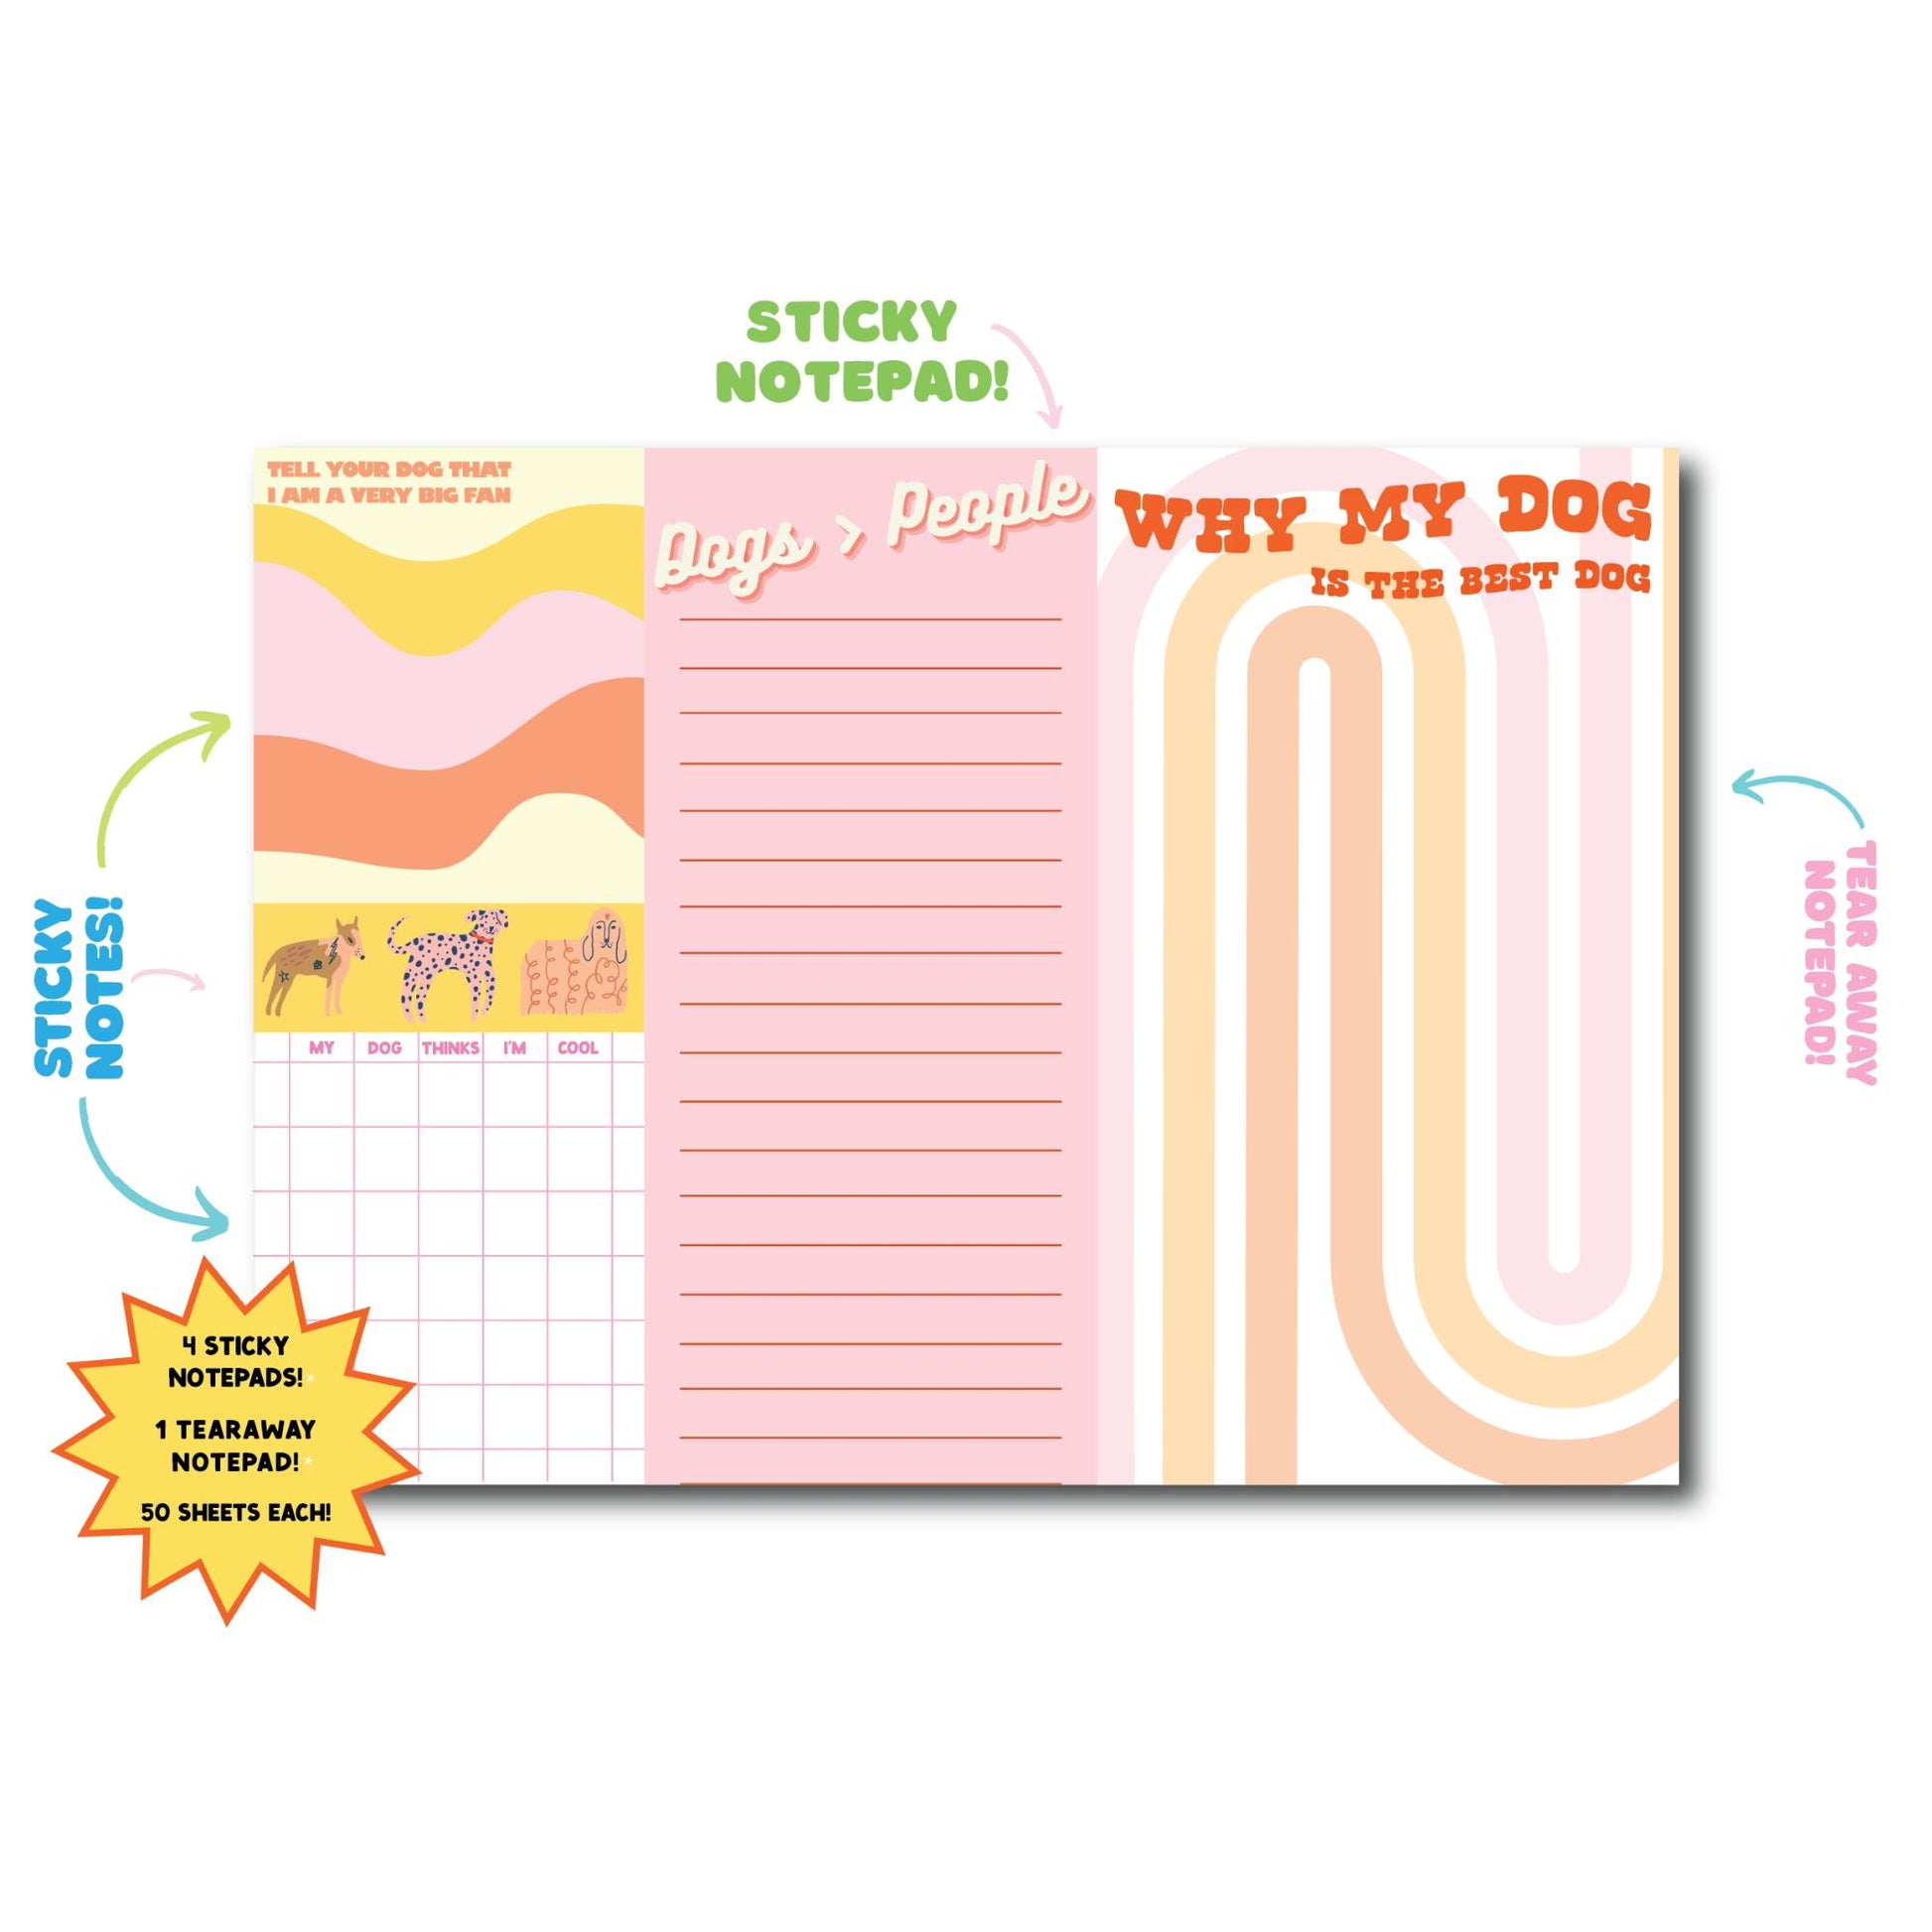 Dog Lovers Notepad Set | 5 Notepads in One Giftable Set